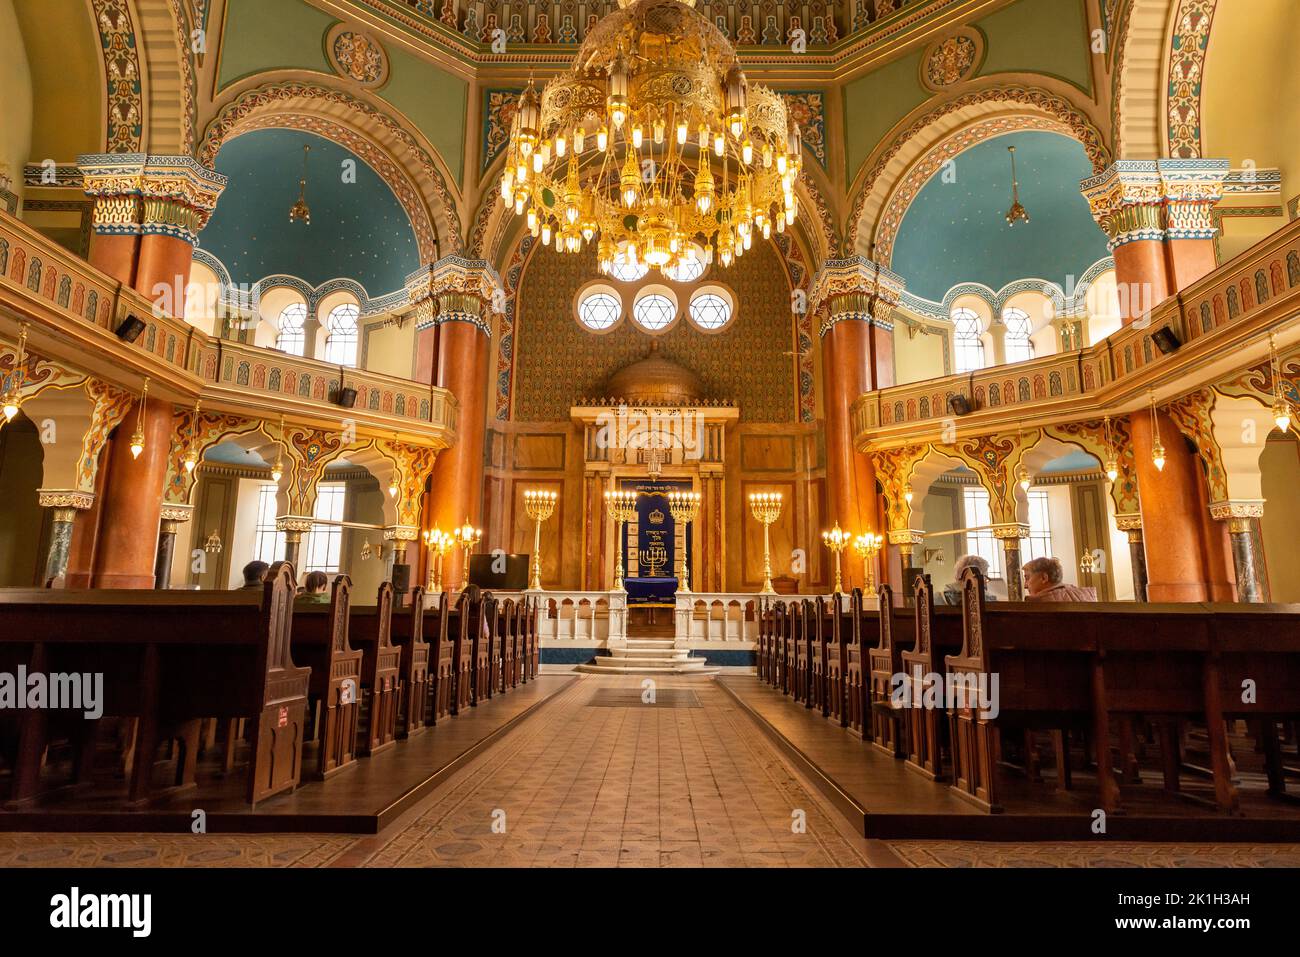 Sofia synagogue interior or Shul as worship and study place for the Jews in Sofia, Bulgaria, Eastern Europe, Balkans, EU Stock Photo